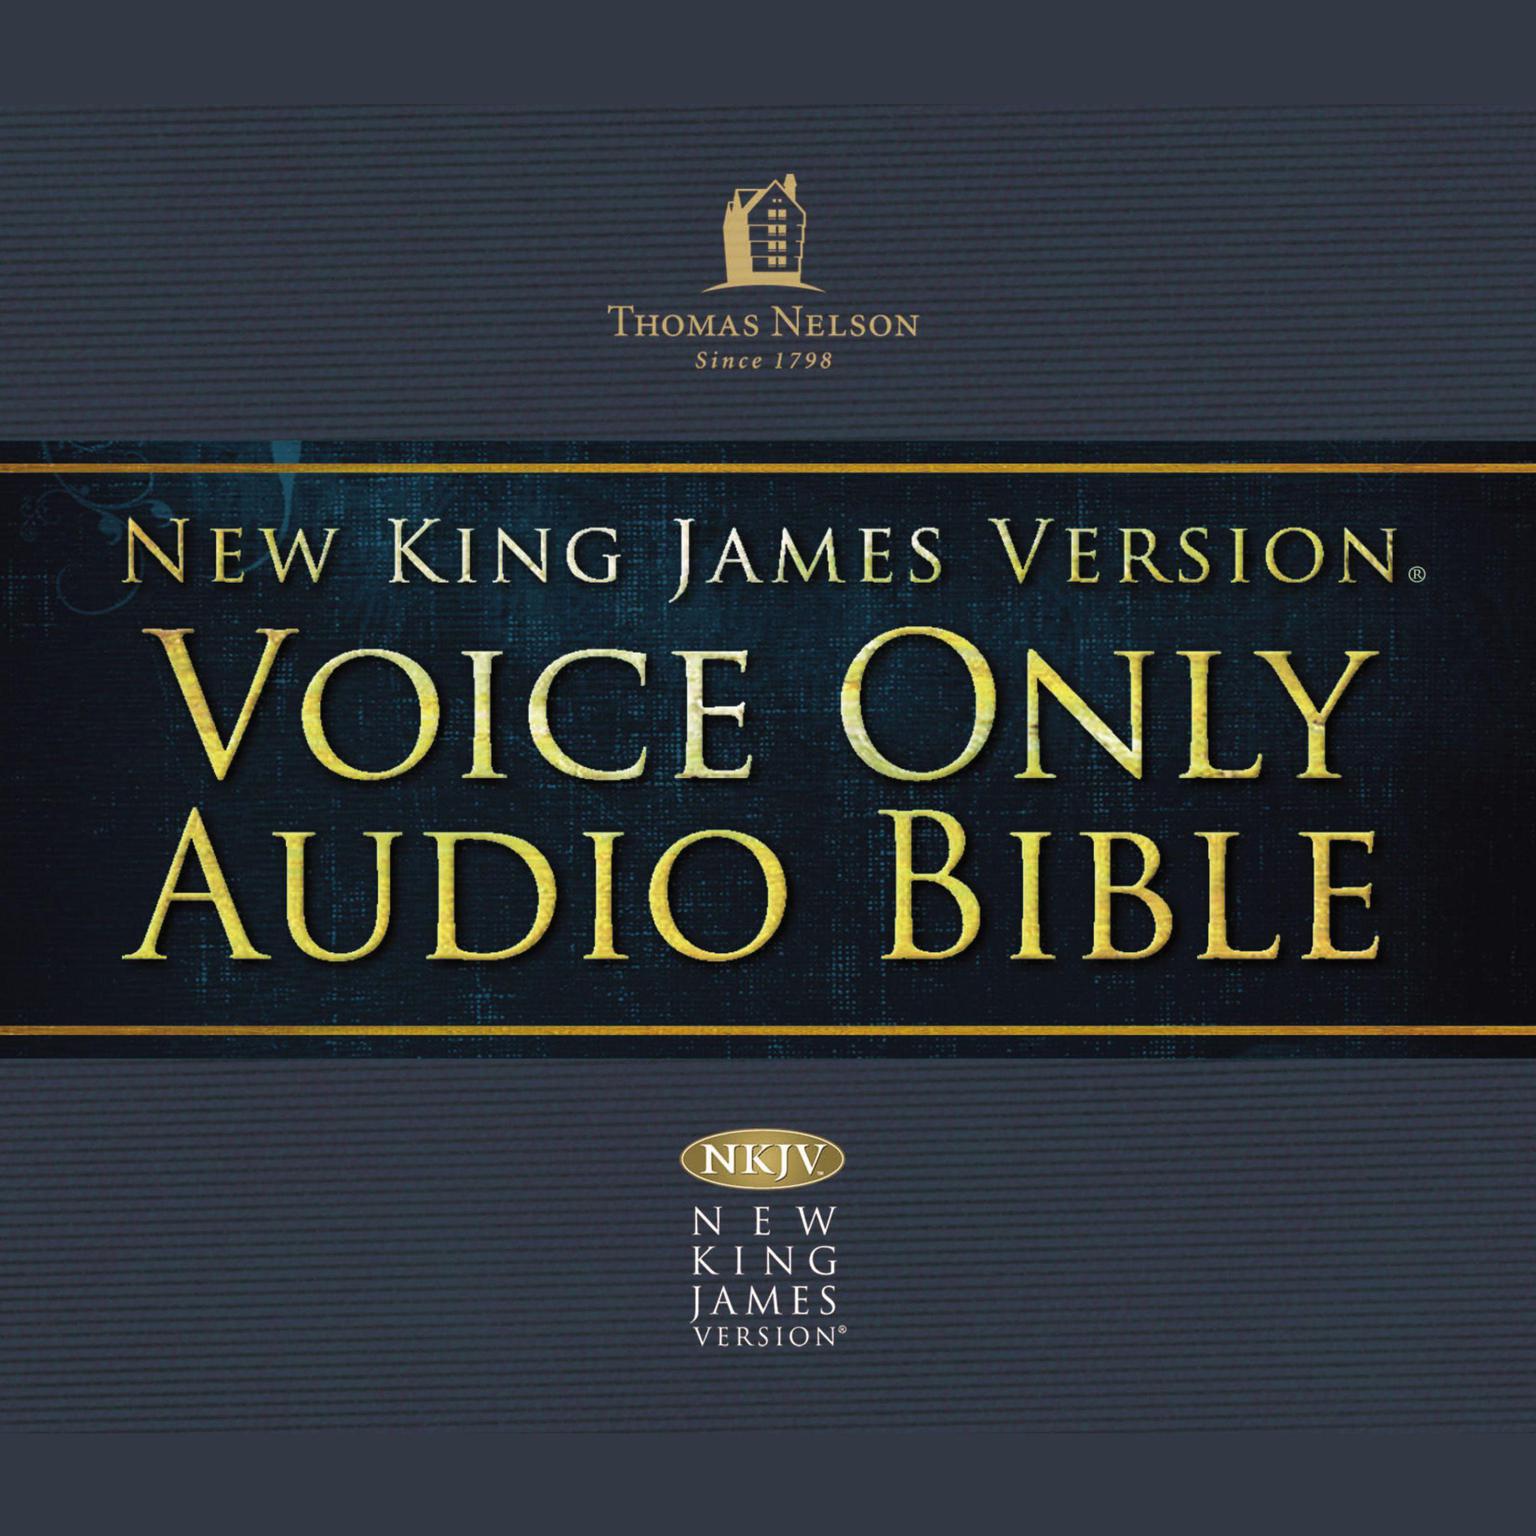 Voice Only Audio Bible - New King James Version, NKJV (Narrated by Bob Souer): (30) 1 and 2 Corinthians: Holy Bible, New King James Version Audiobook, by Thomas Nelson